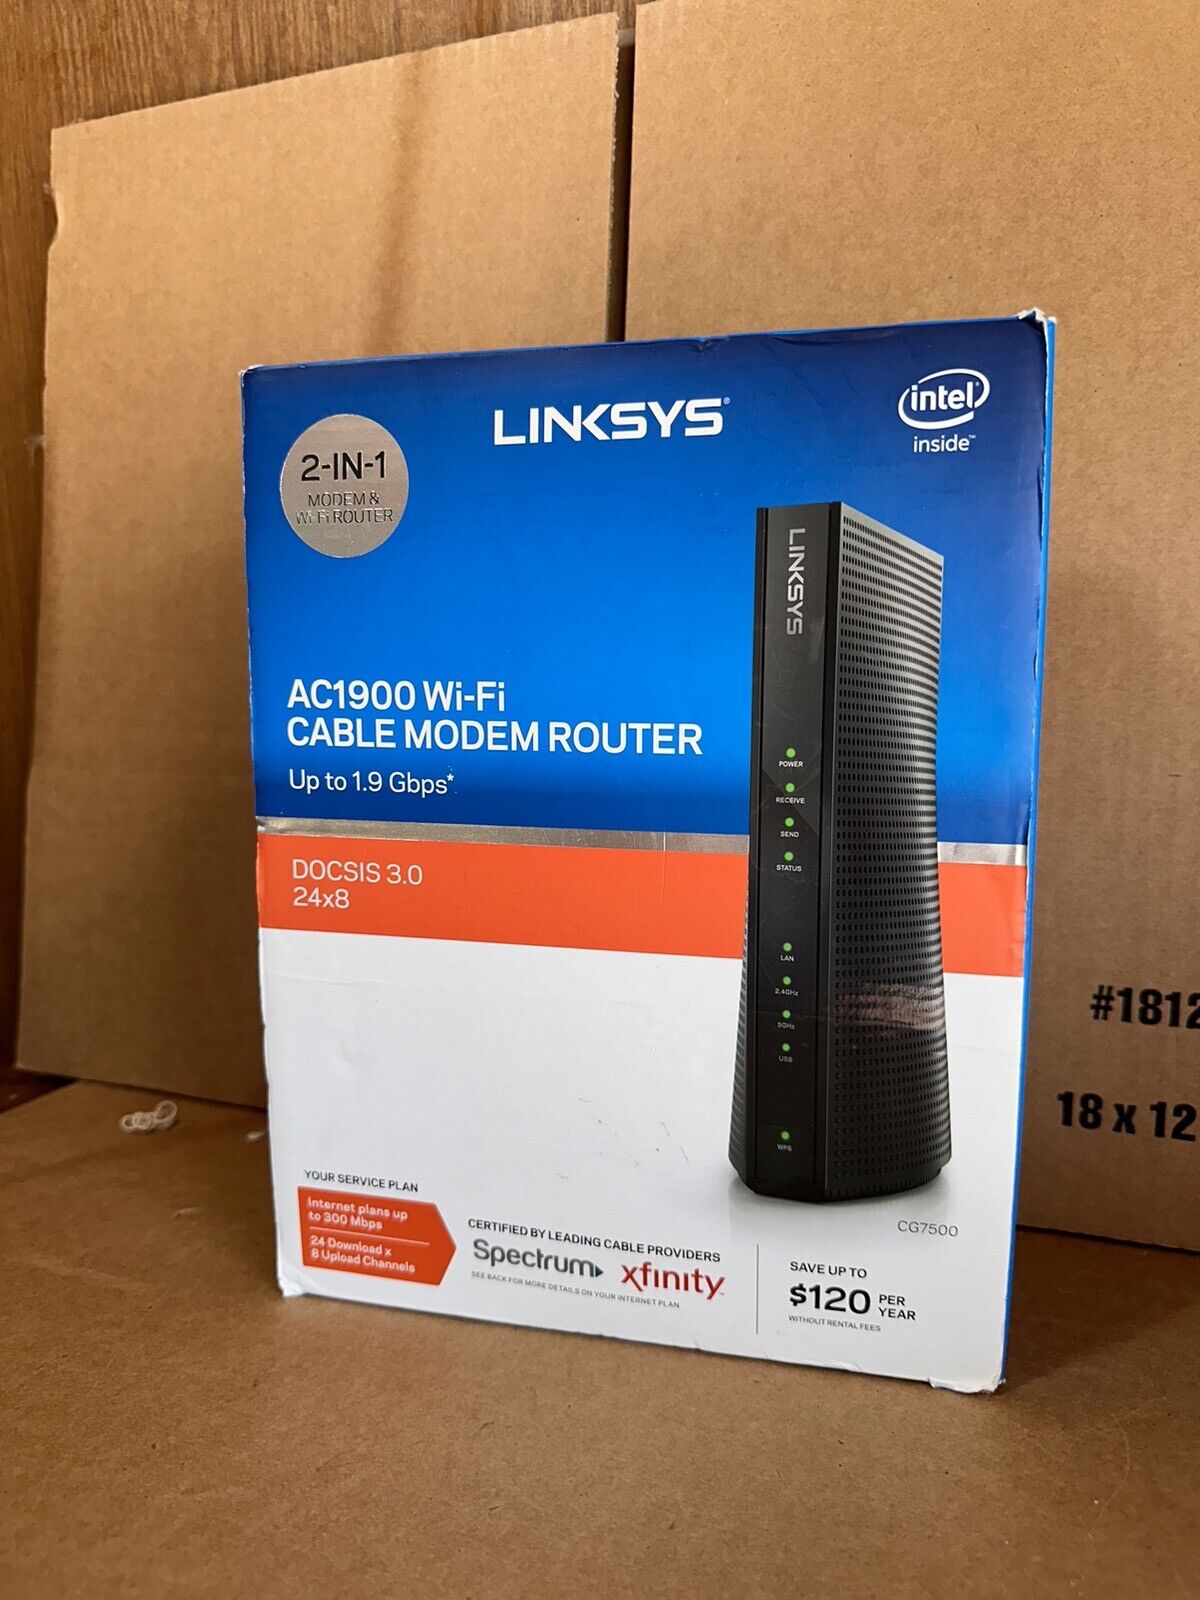 LINKSYS AC1900 DUAL-BAND WI-FI CABLE MODEM ROUTER #CG7500